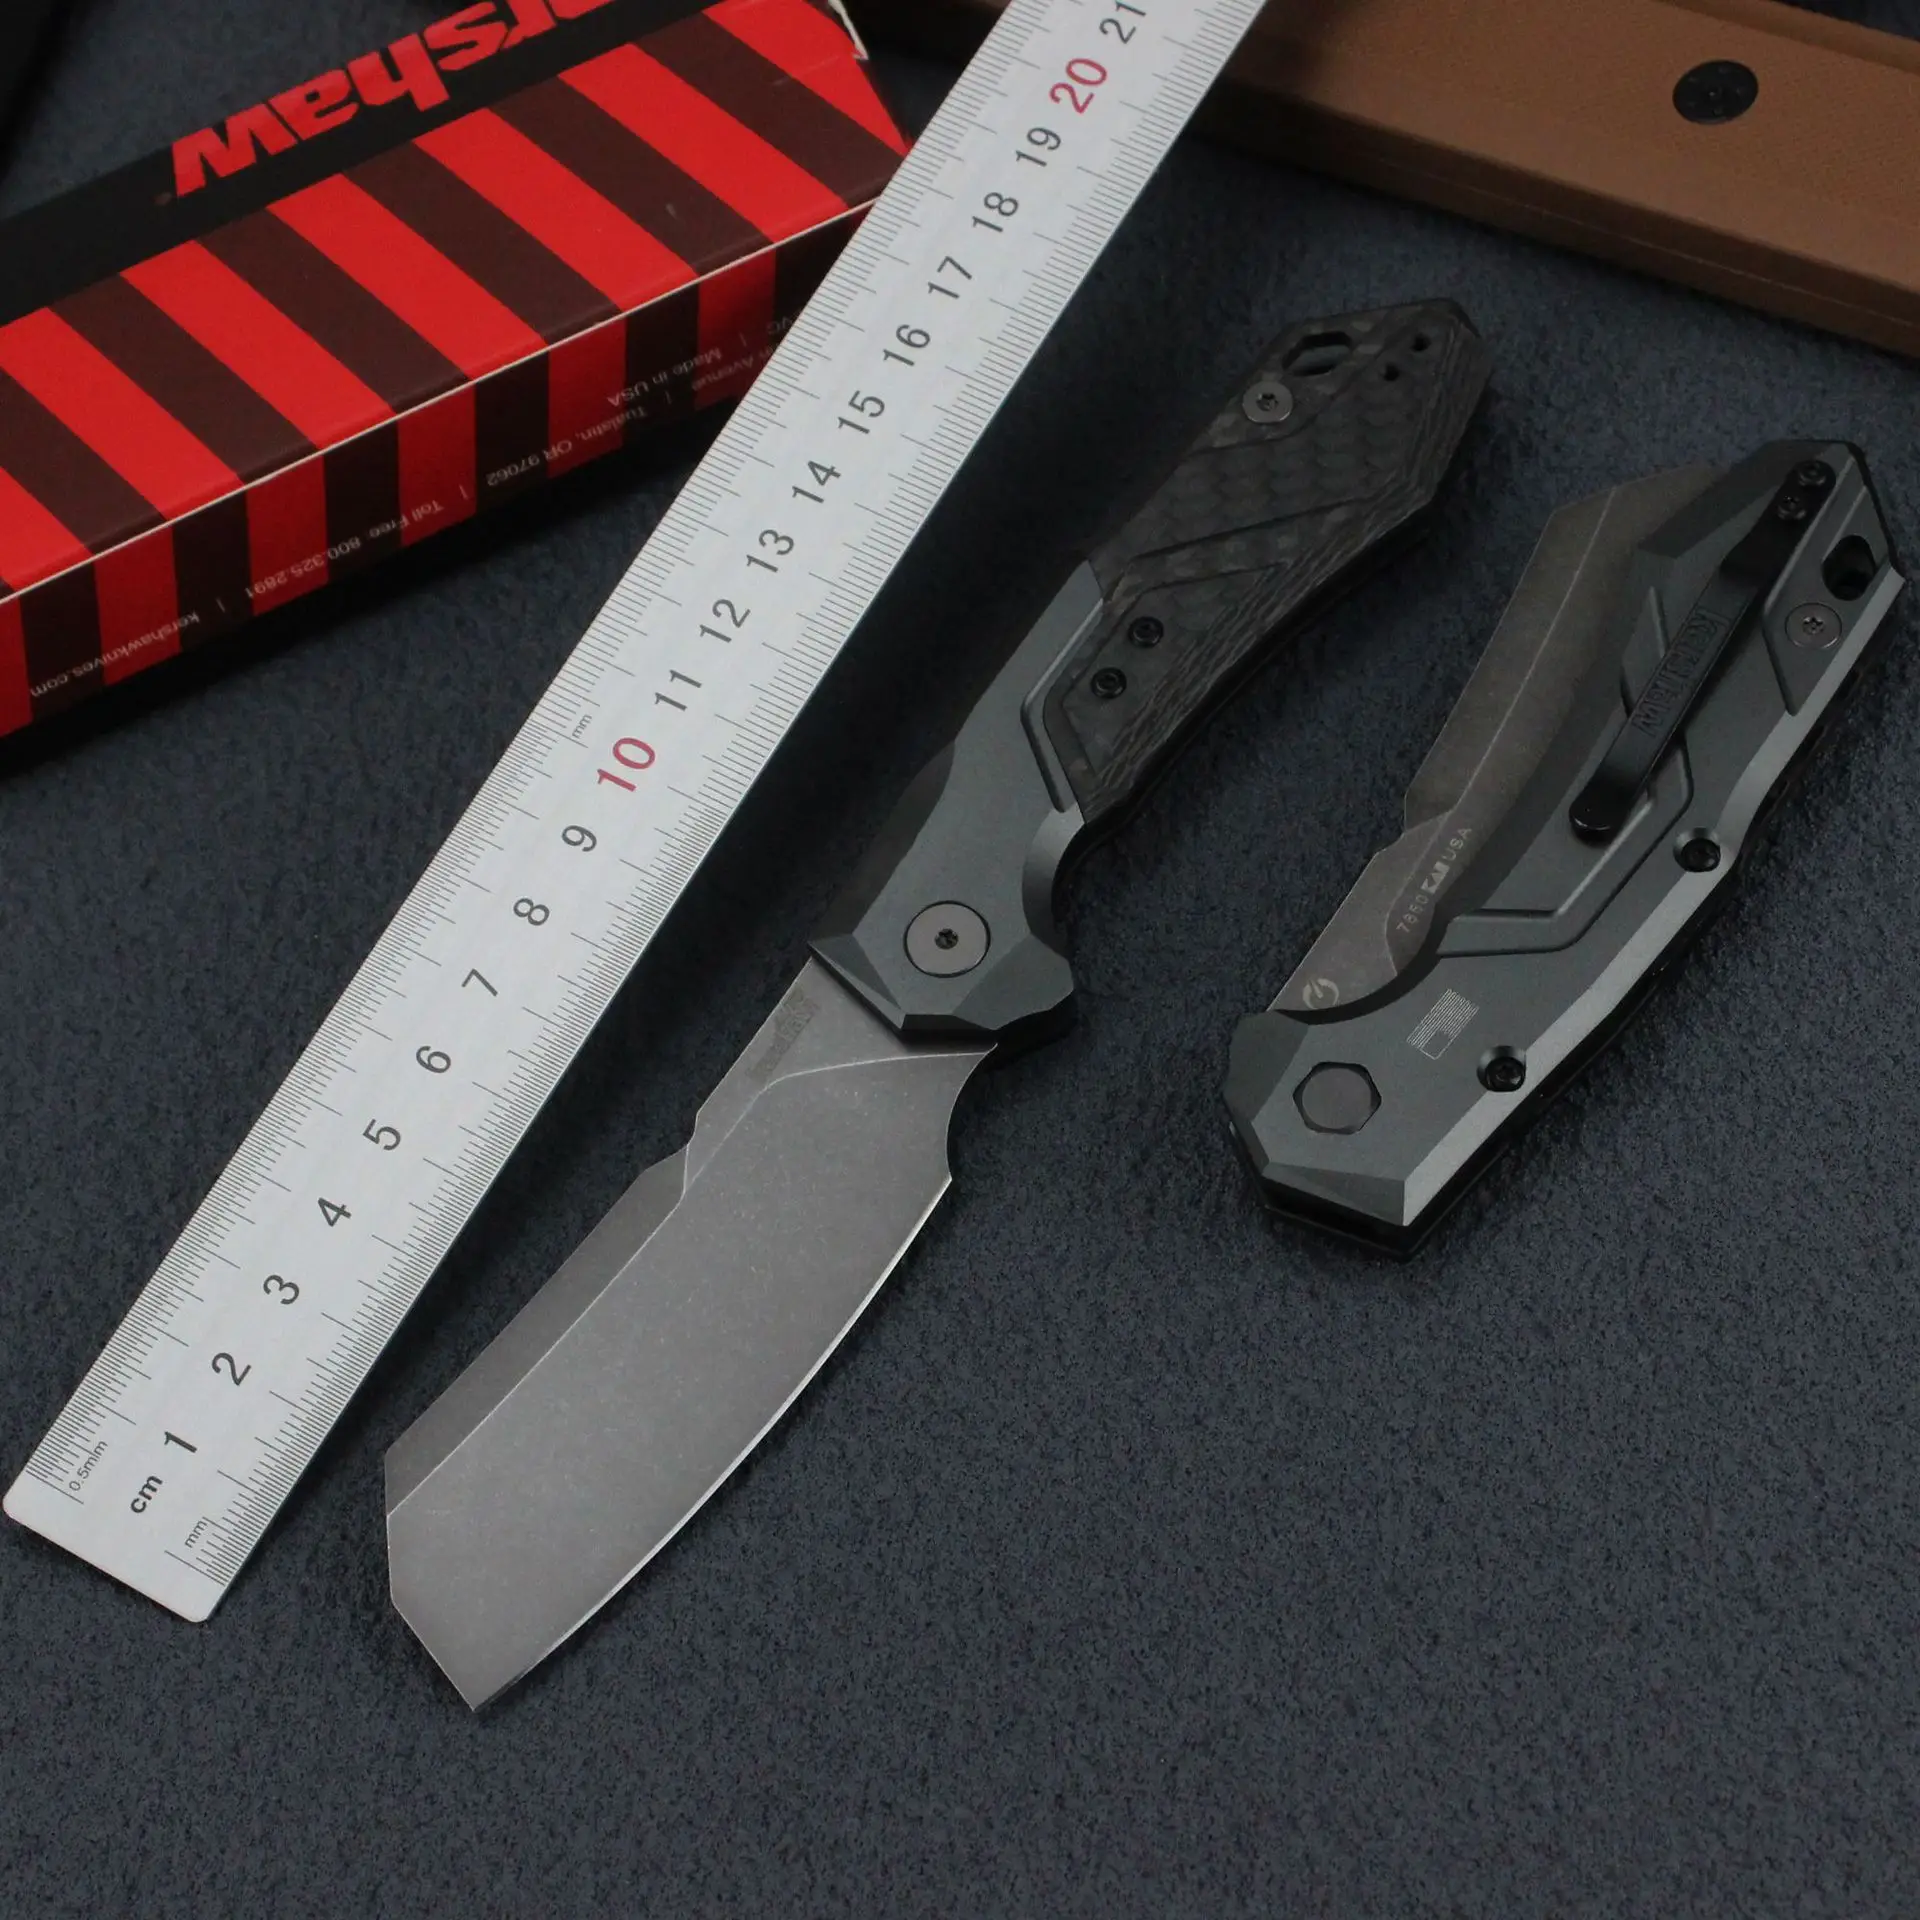 Kershaw 7850 Multi Pocket Folding Outdoor Knife CPM-154 Blade Fruit Kitchen Hunting Knives Survival Tactical Utility EDC Tools